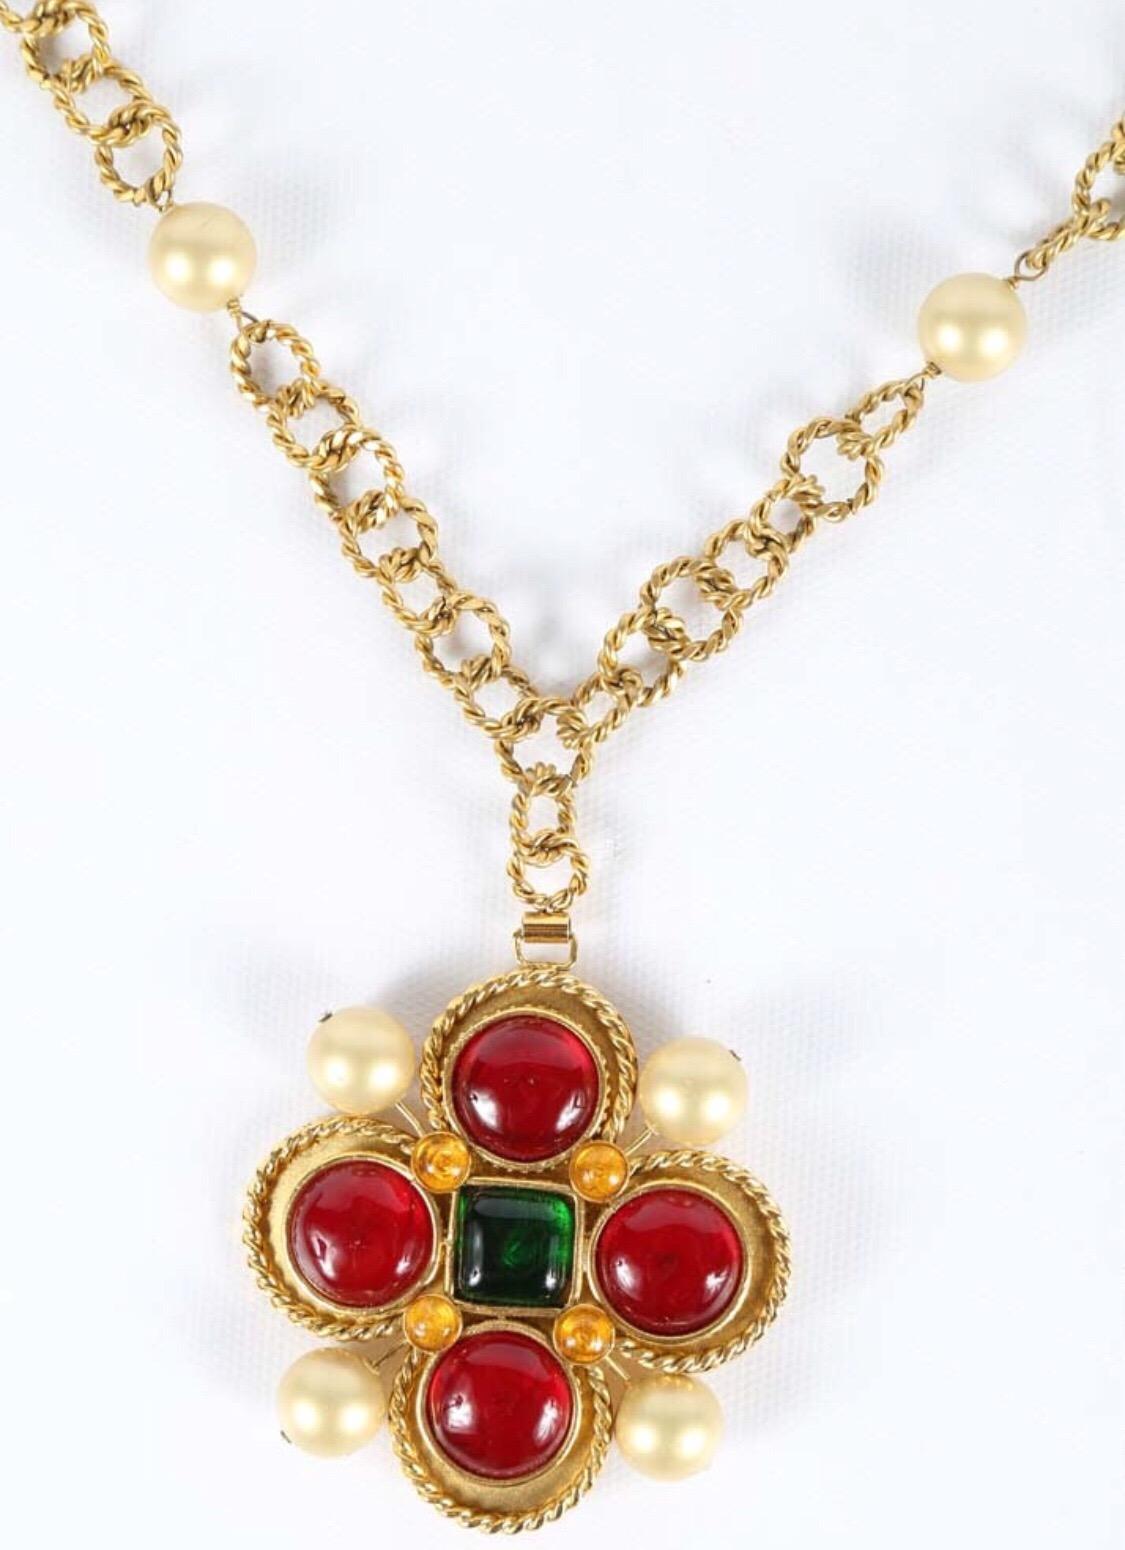 Chanel Gripoix Pendent Necklace with Pearls, 1980s 4